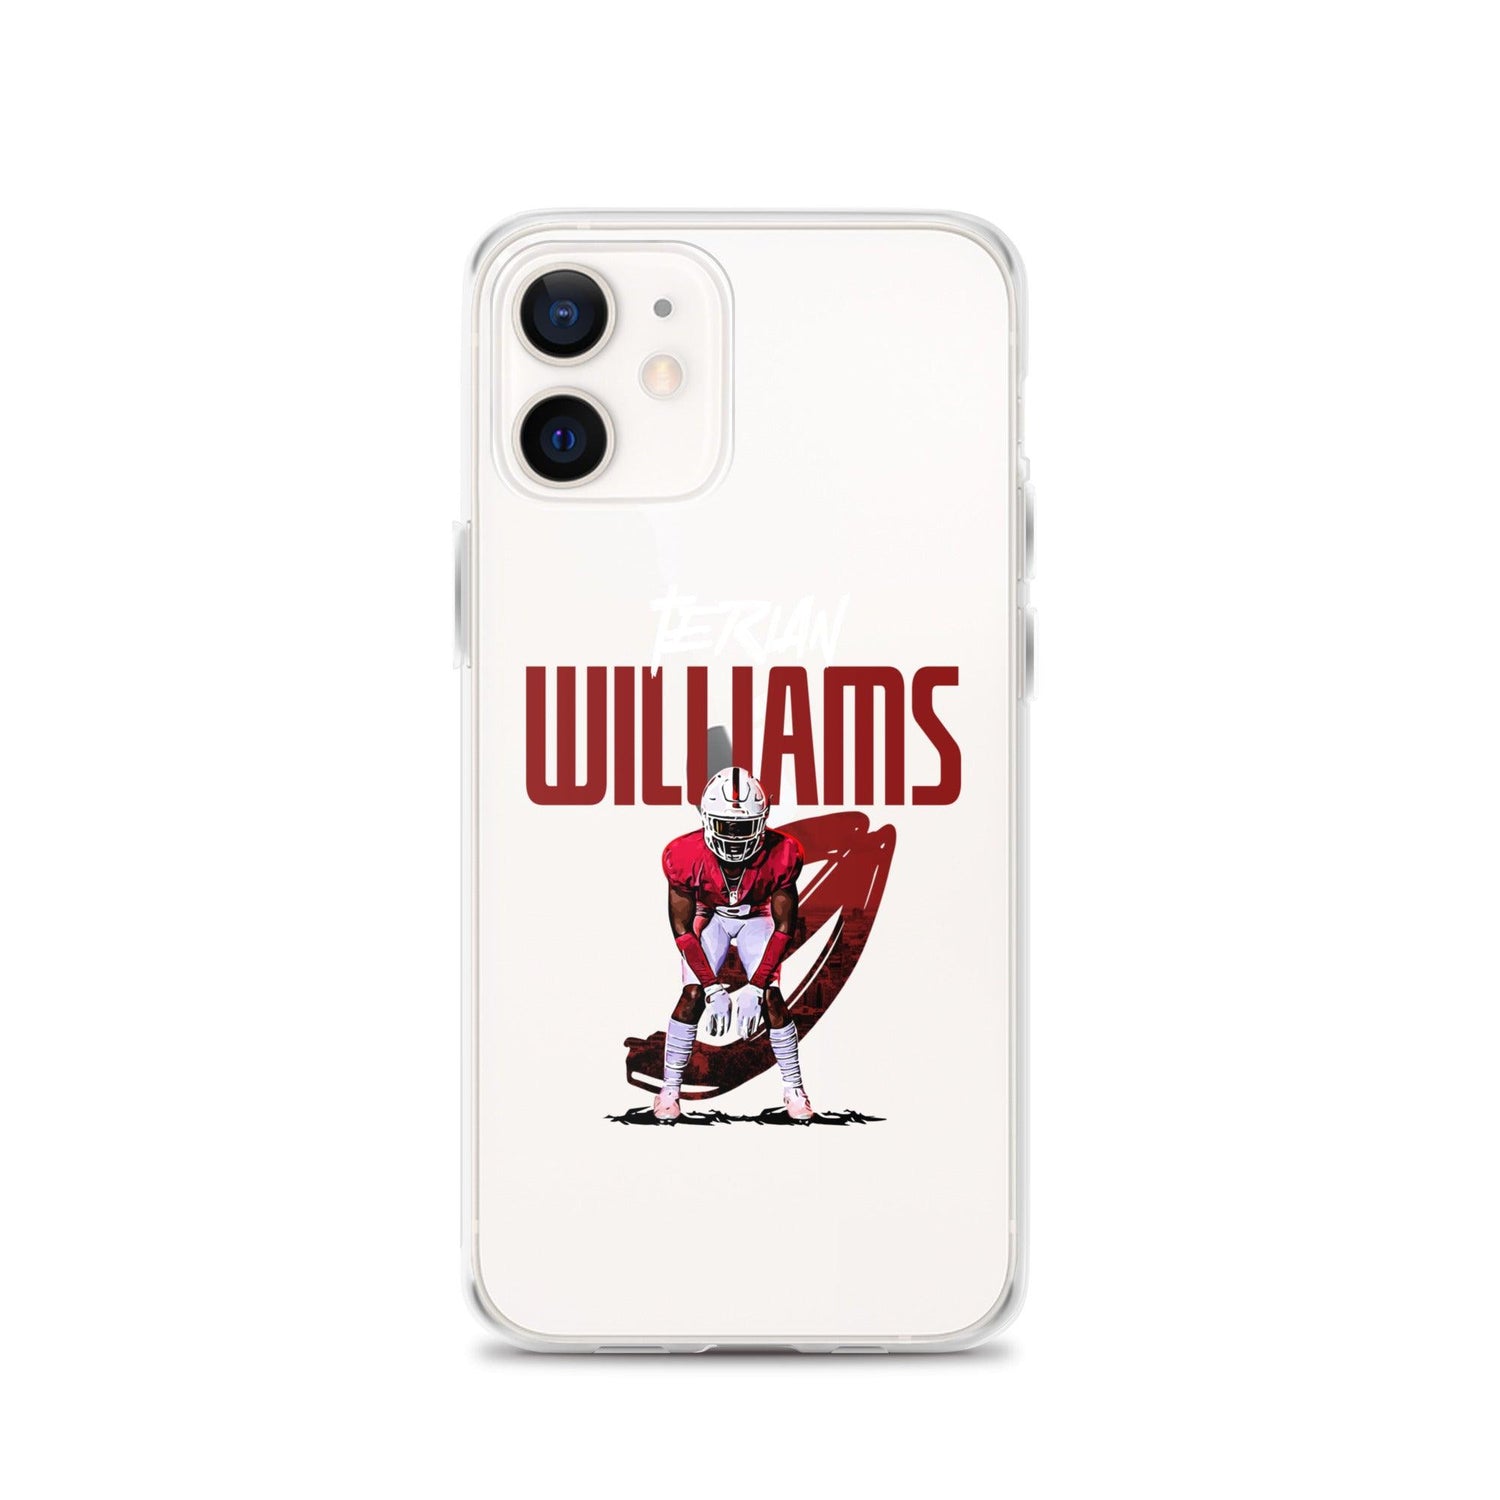 Terian Williams "Gameday" iPhone Case - Fan Arch